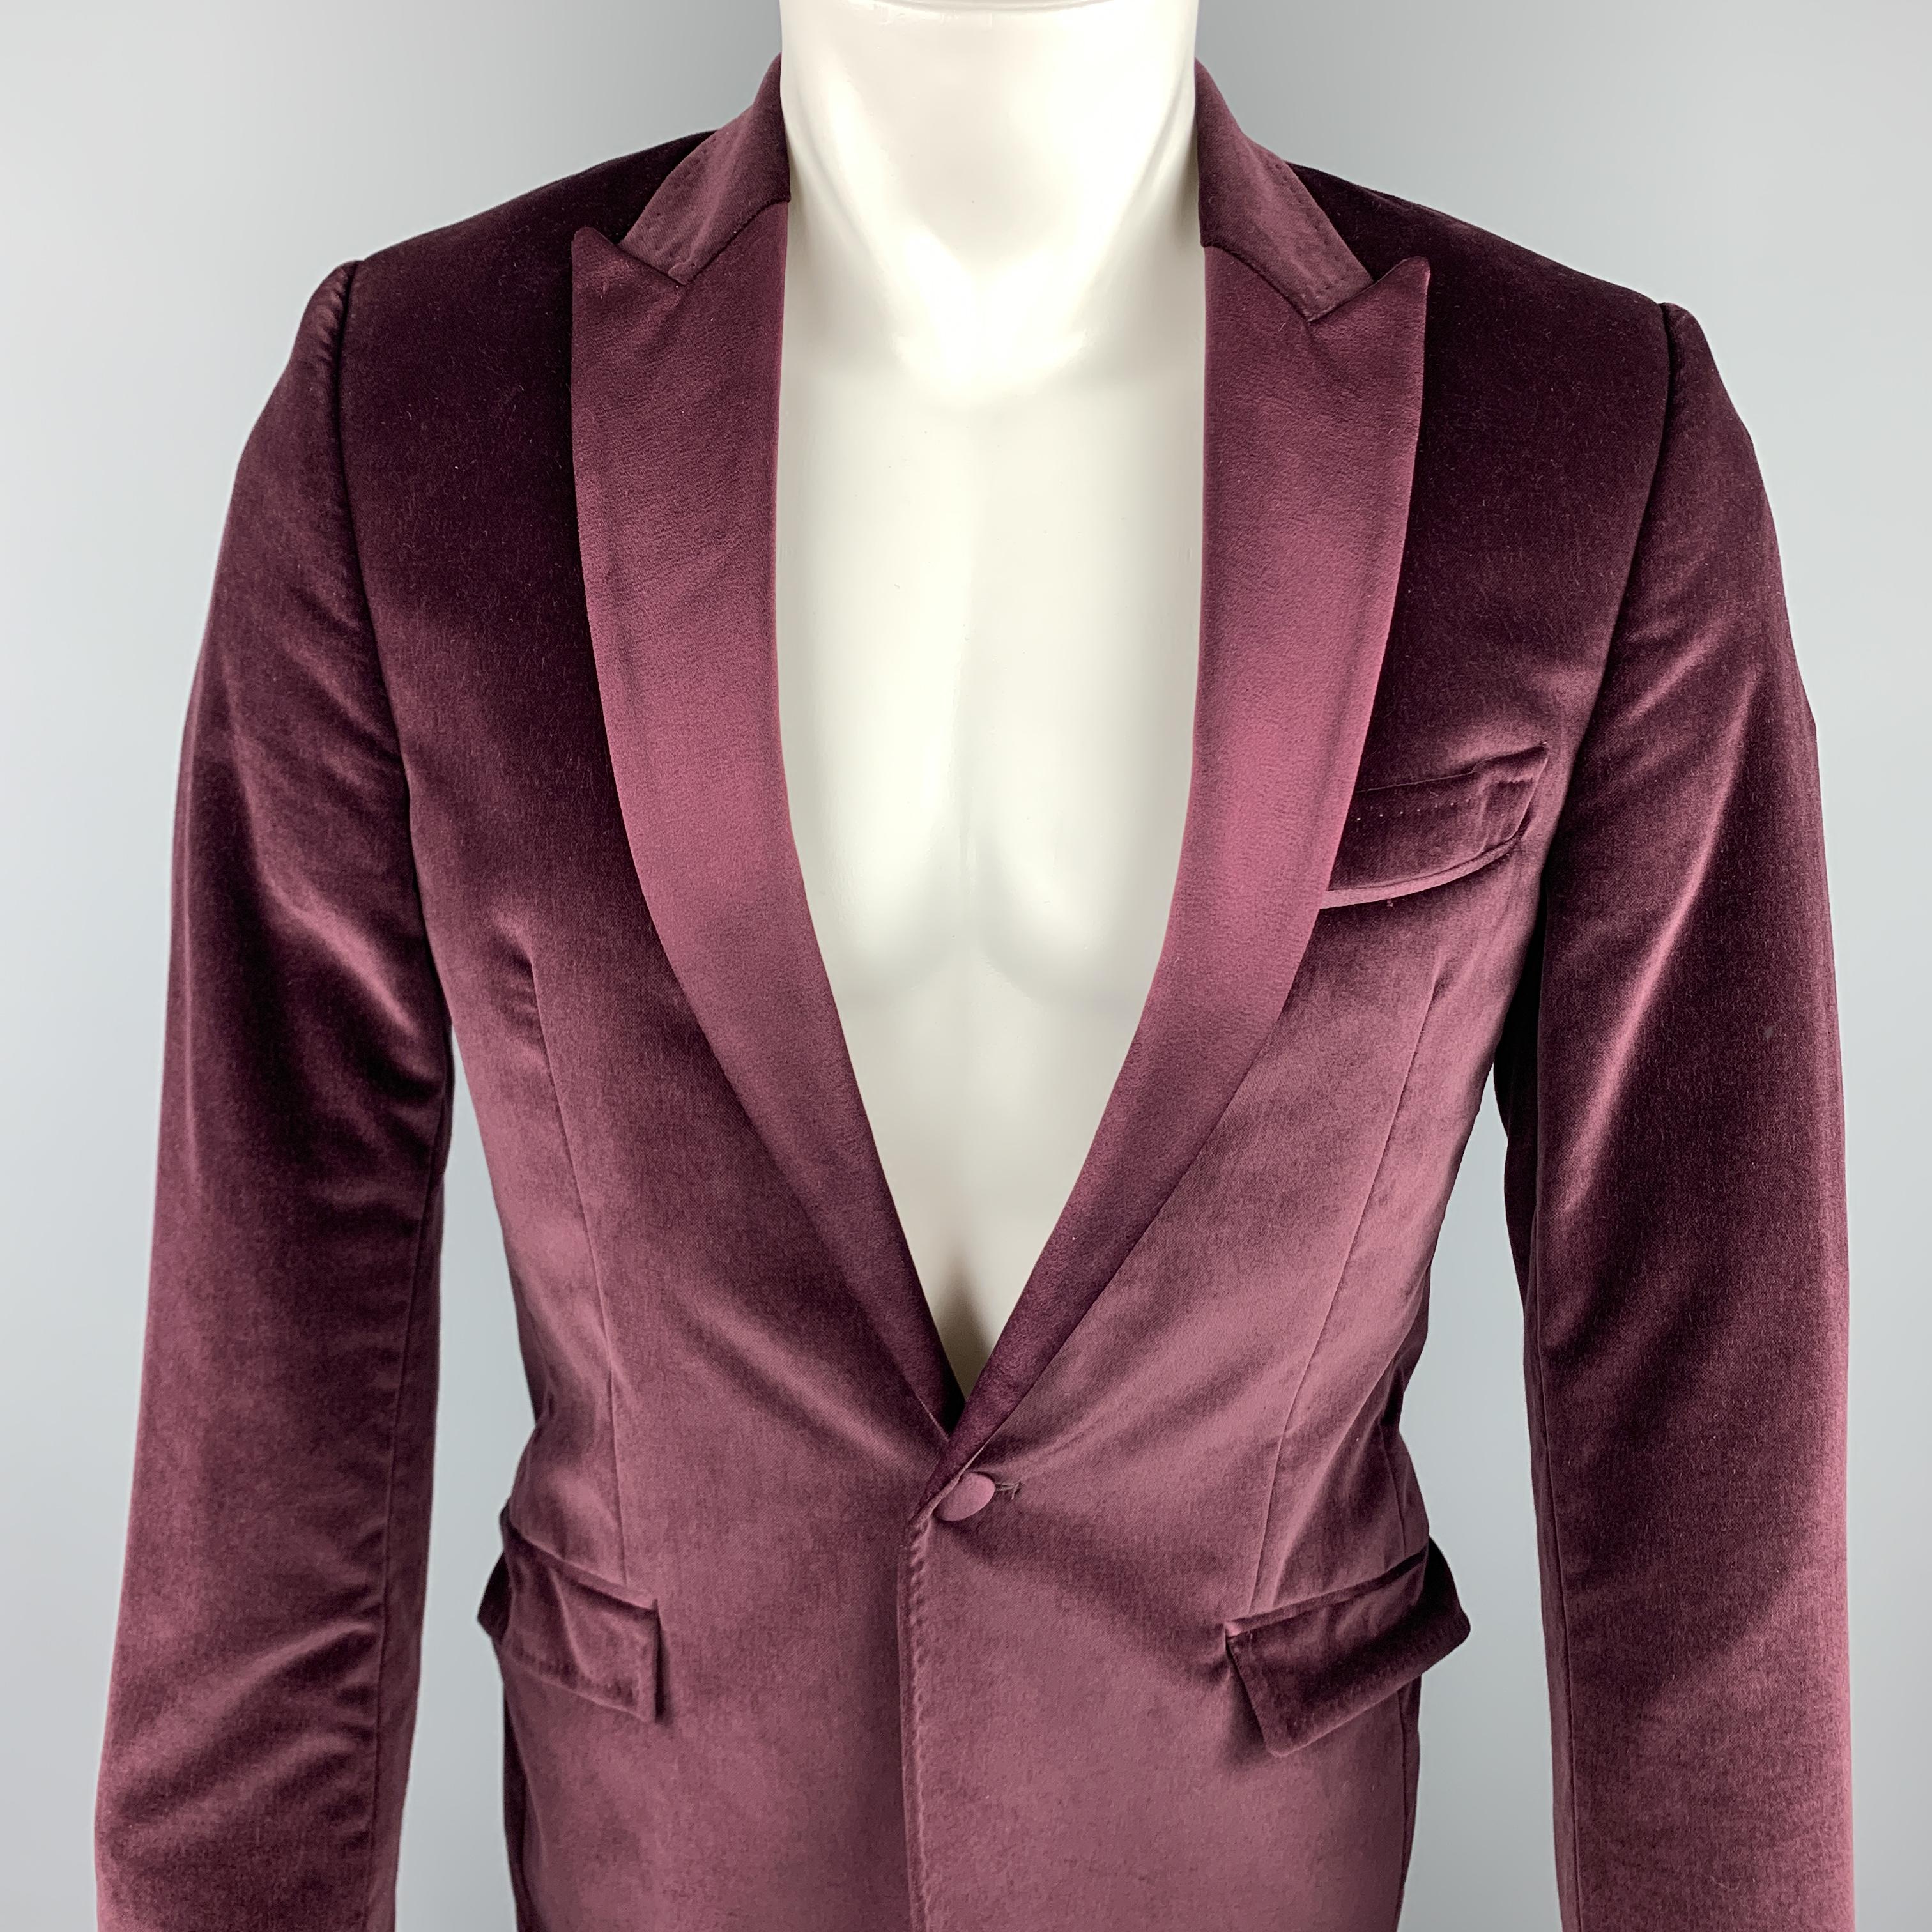 VERSACE COLLECTION sport coat comes in a burgundy cotton velvet featuring a peak lapel style, flap pockets, and a single button closure. 

Excellent Pre-Owned Condition.
Marked: 46

Measurements:

Shoulder: 16 in. 
Chest: 38 in. 
Sleeve: 26.5